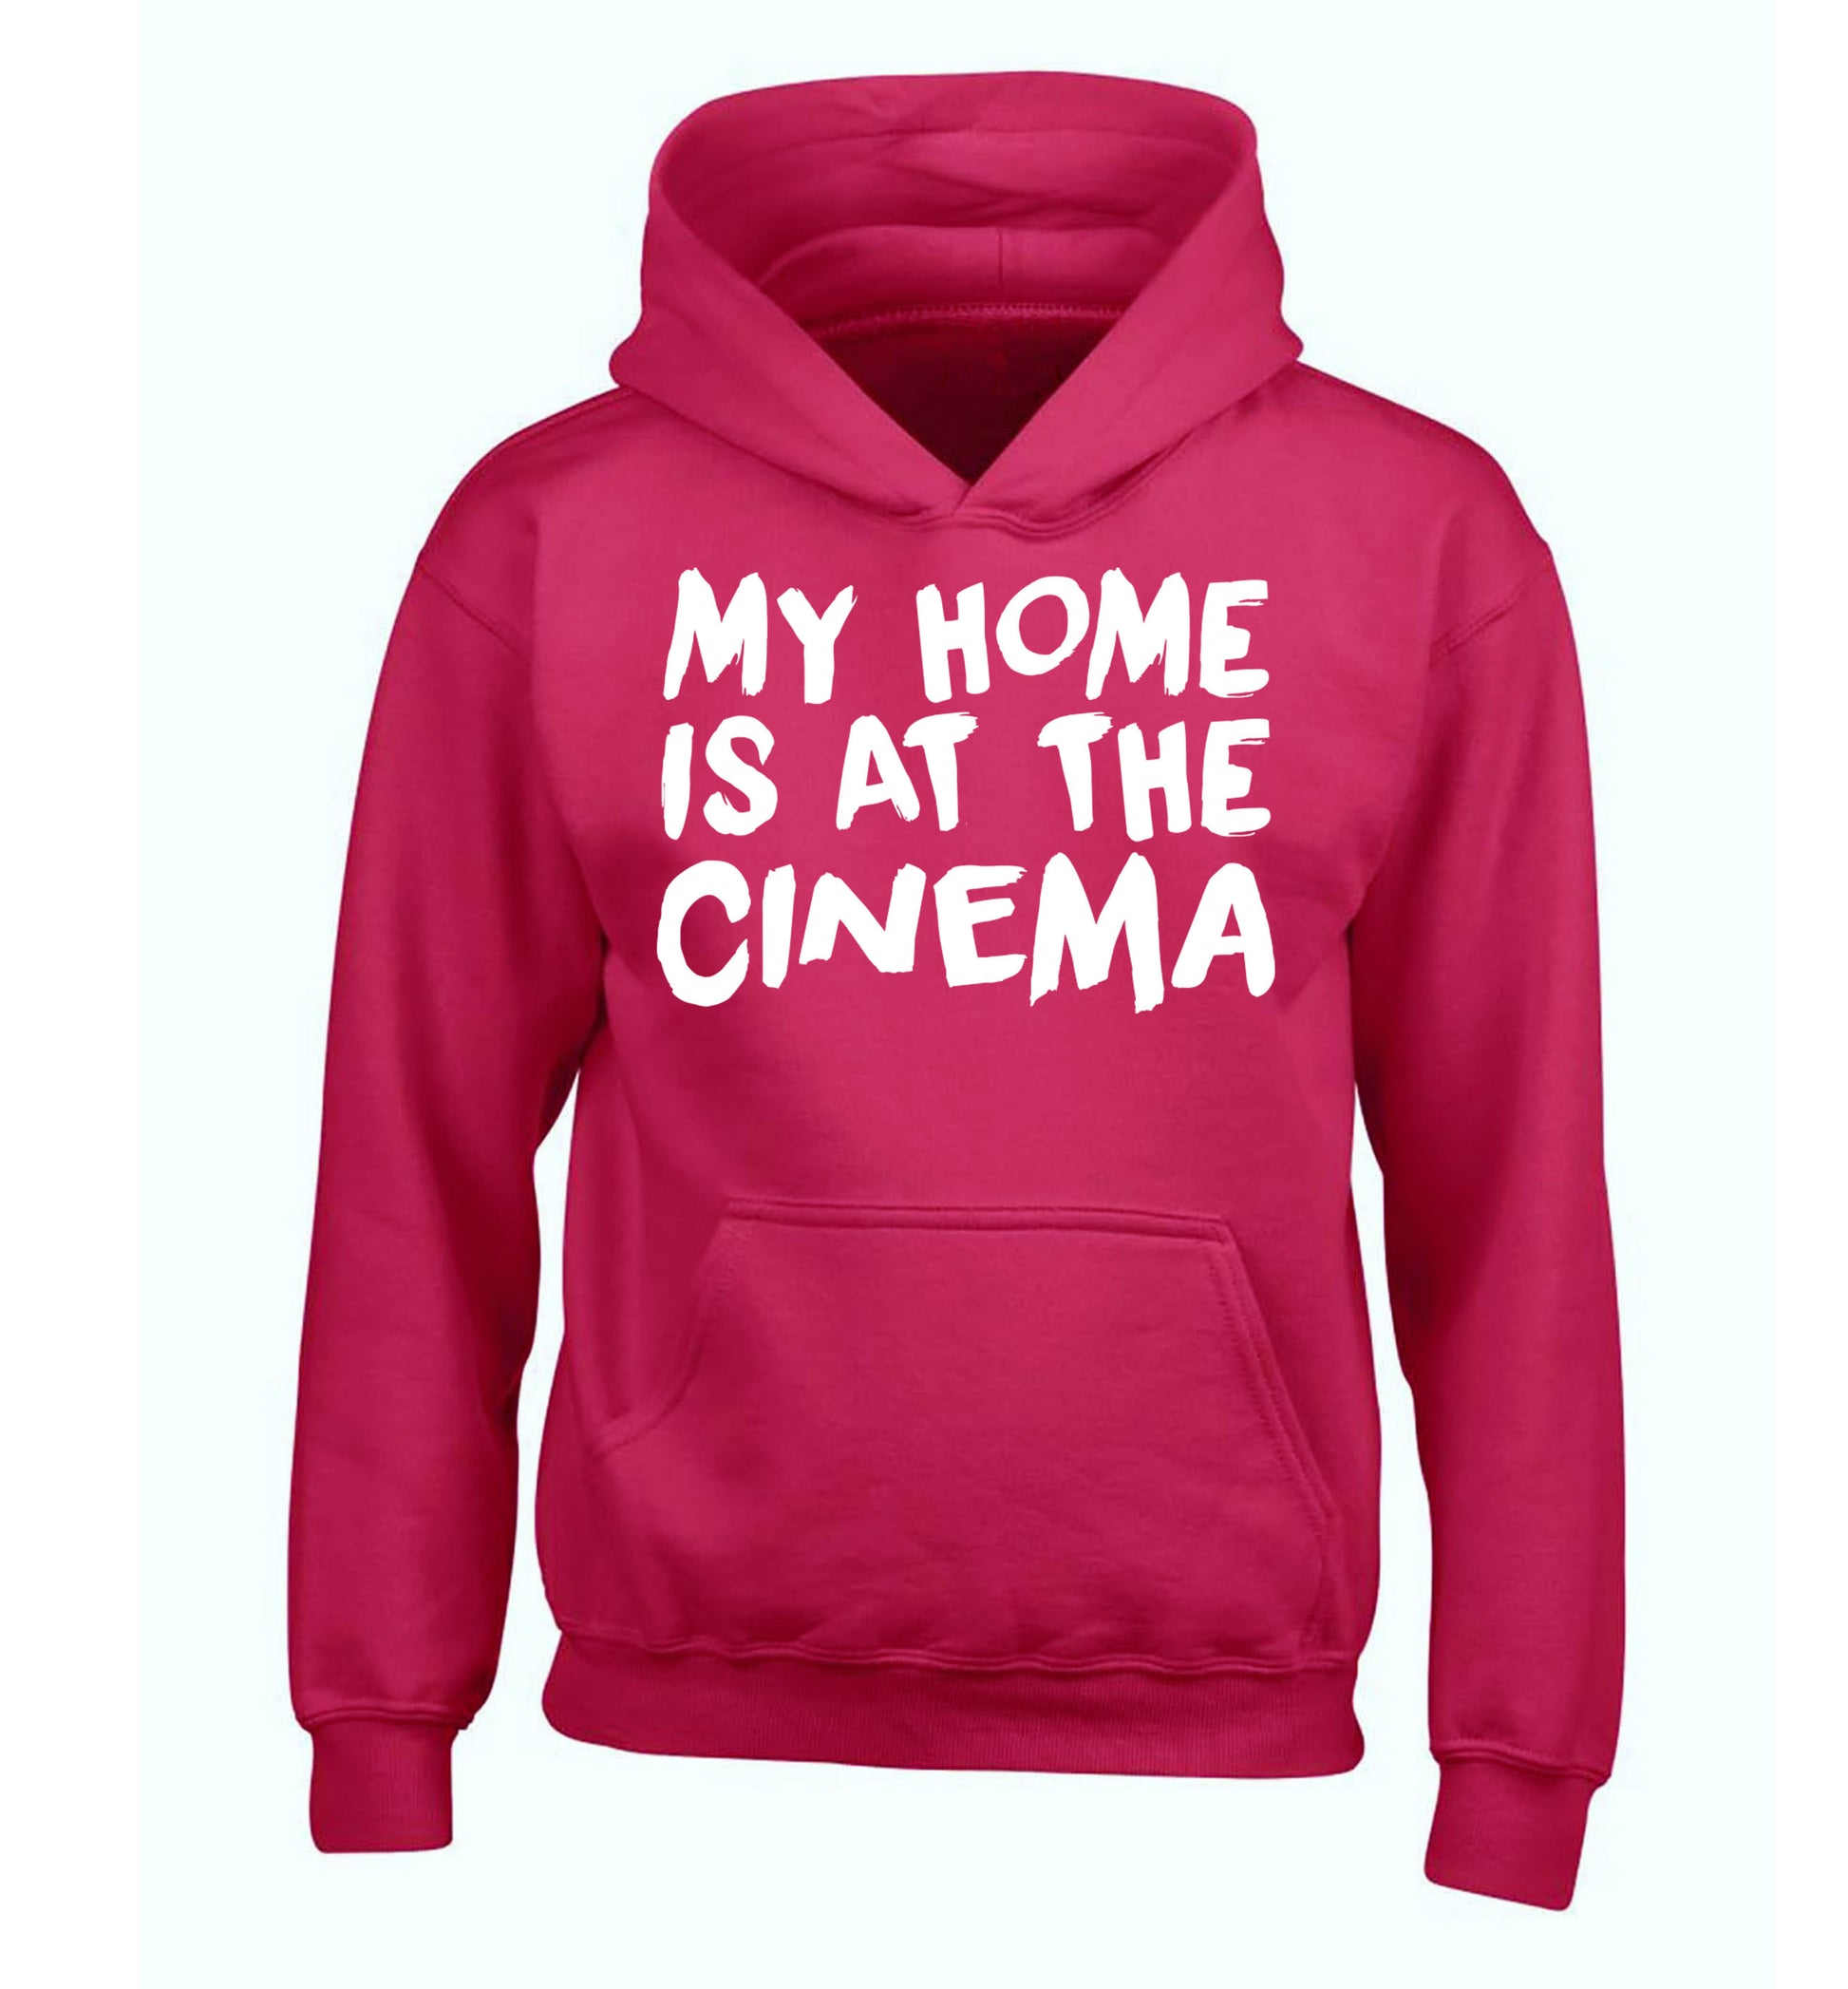 My home is at the cinema children's pink hoodie 12-14 Years